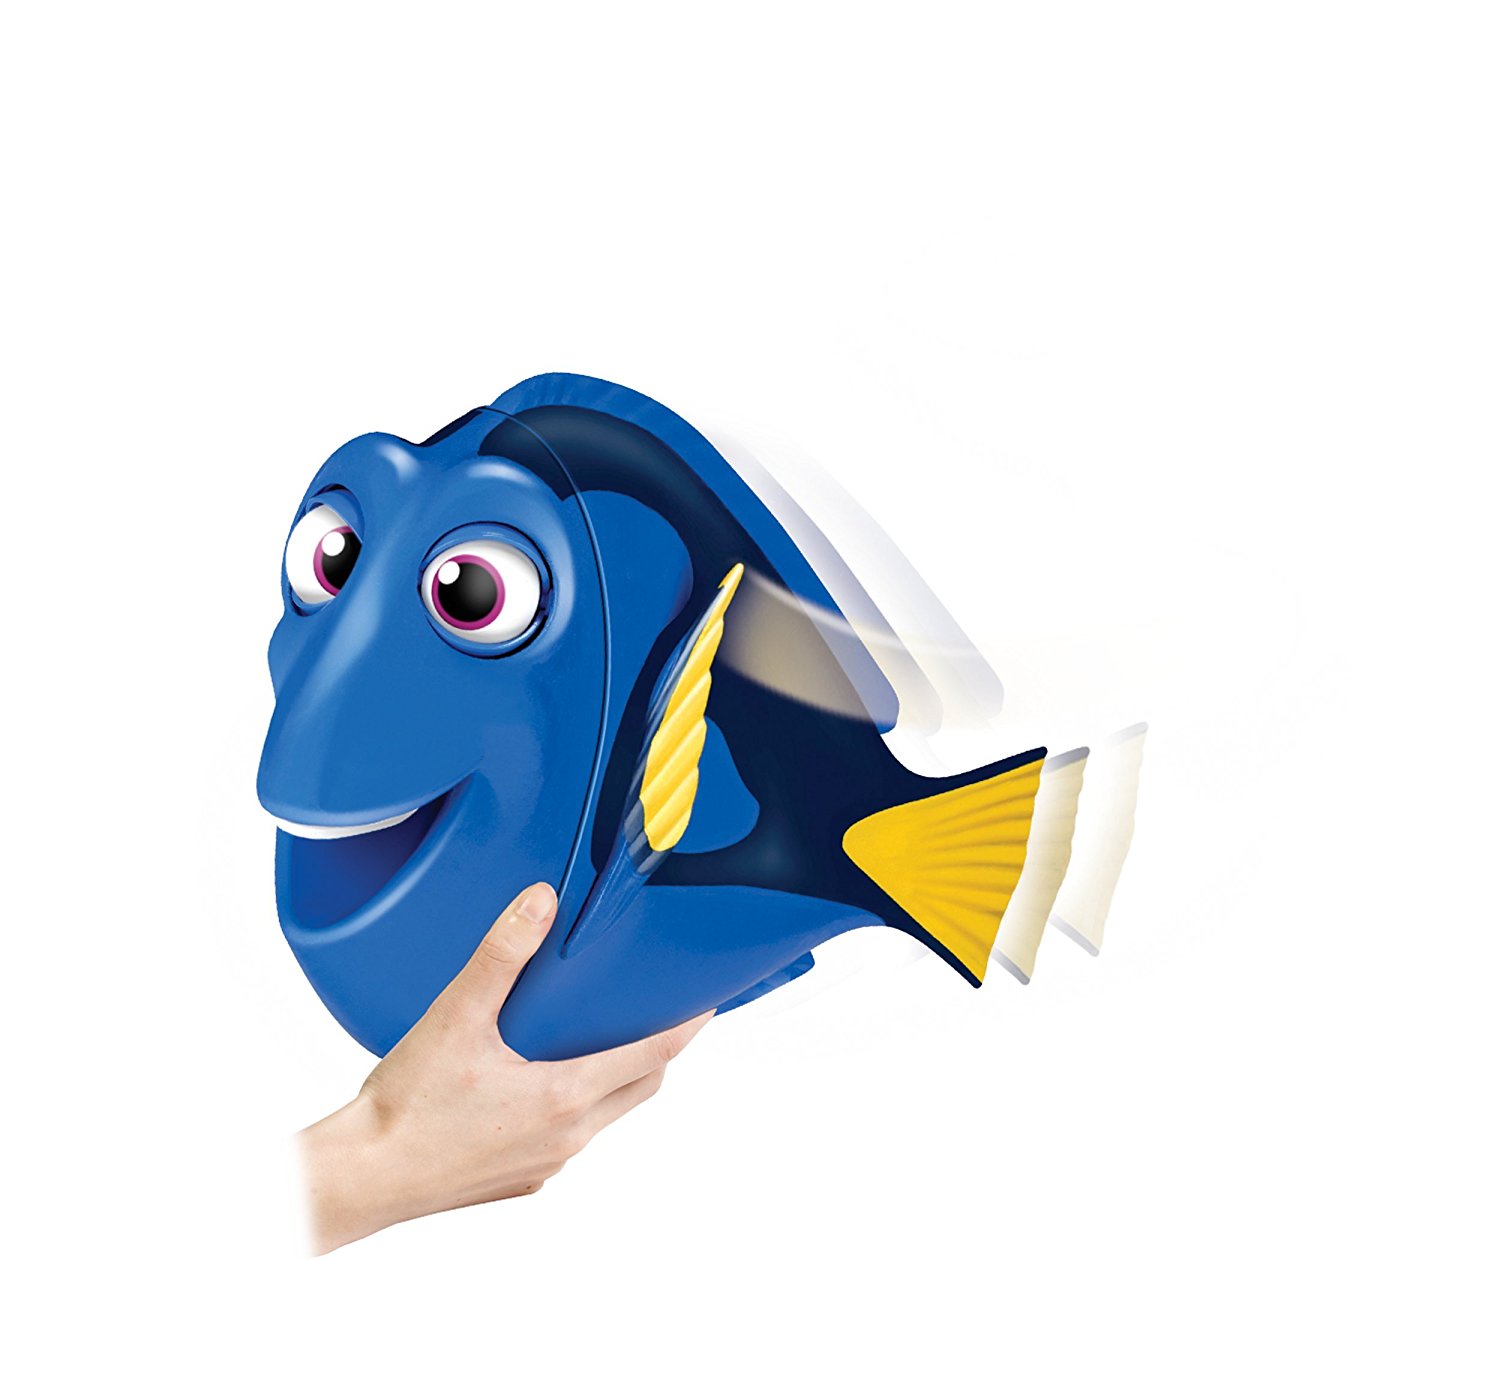 Amazon.com: Finding Dory My Friend Dory: Toys & Games